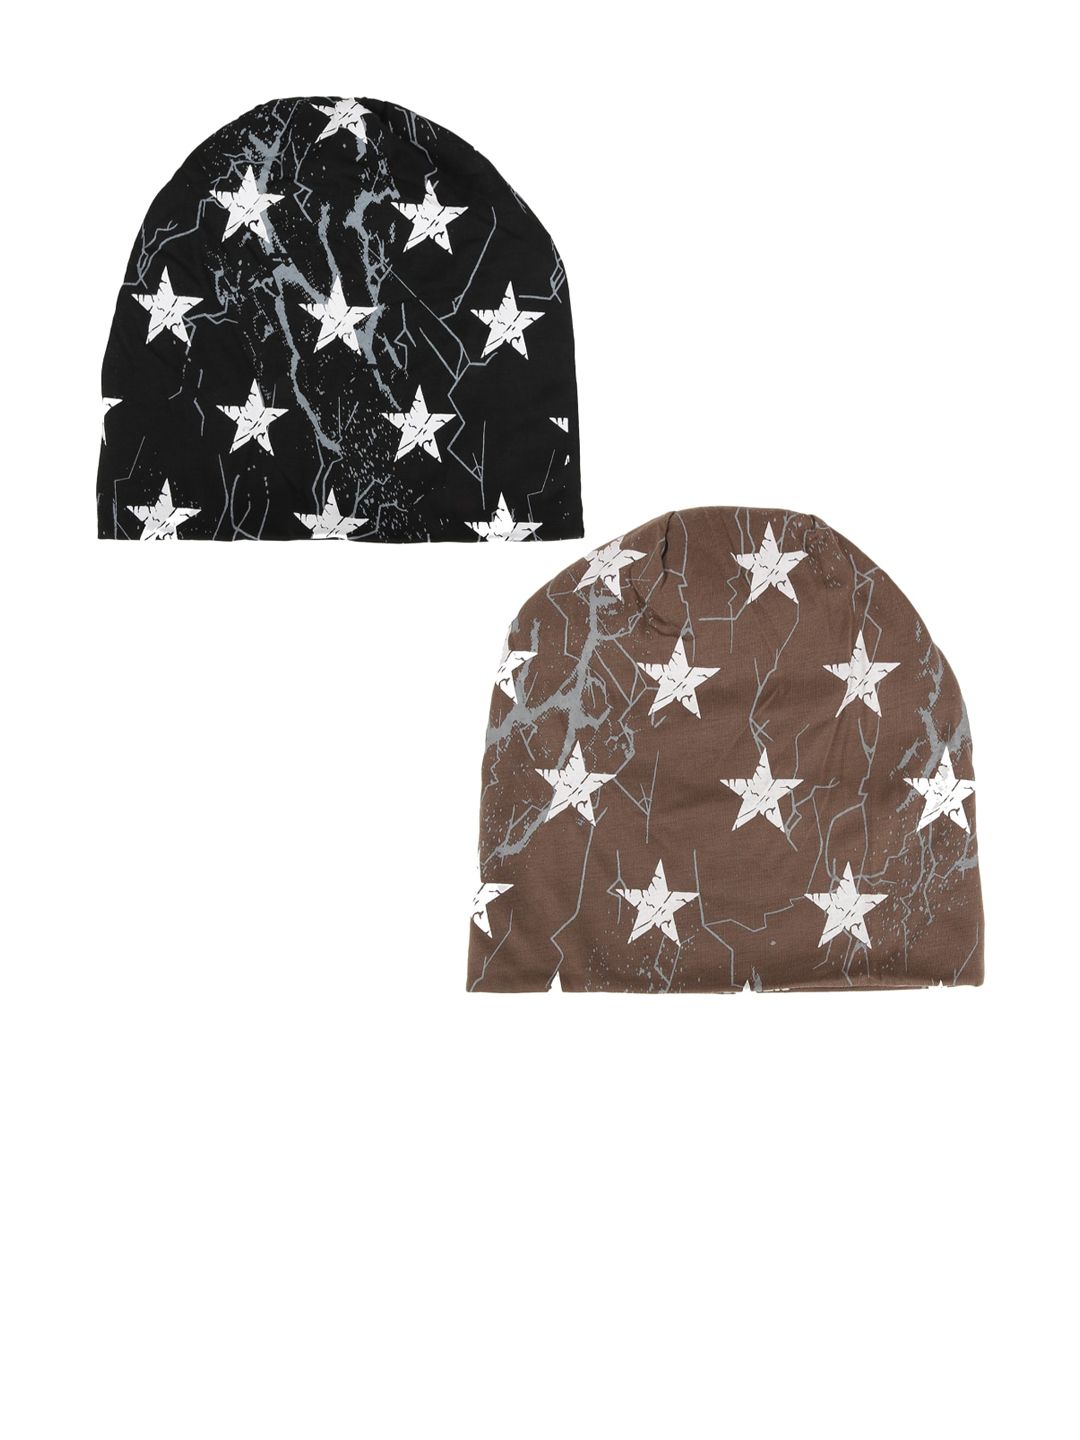 iSWEVEN Unisex Pack of 2 Black & Brown Printed Beanies Price in India